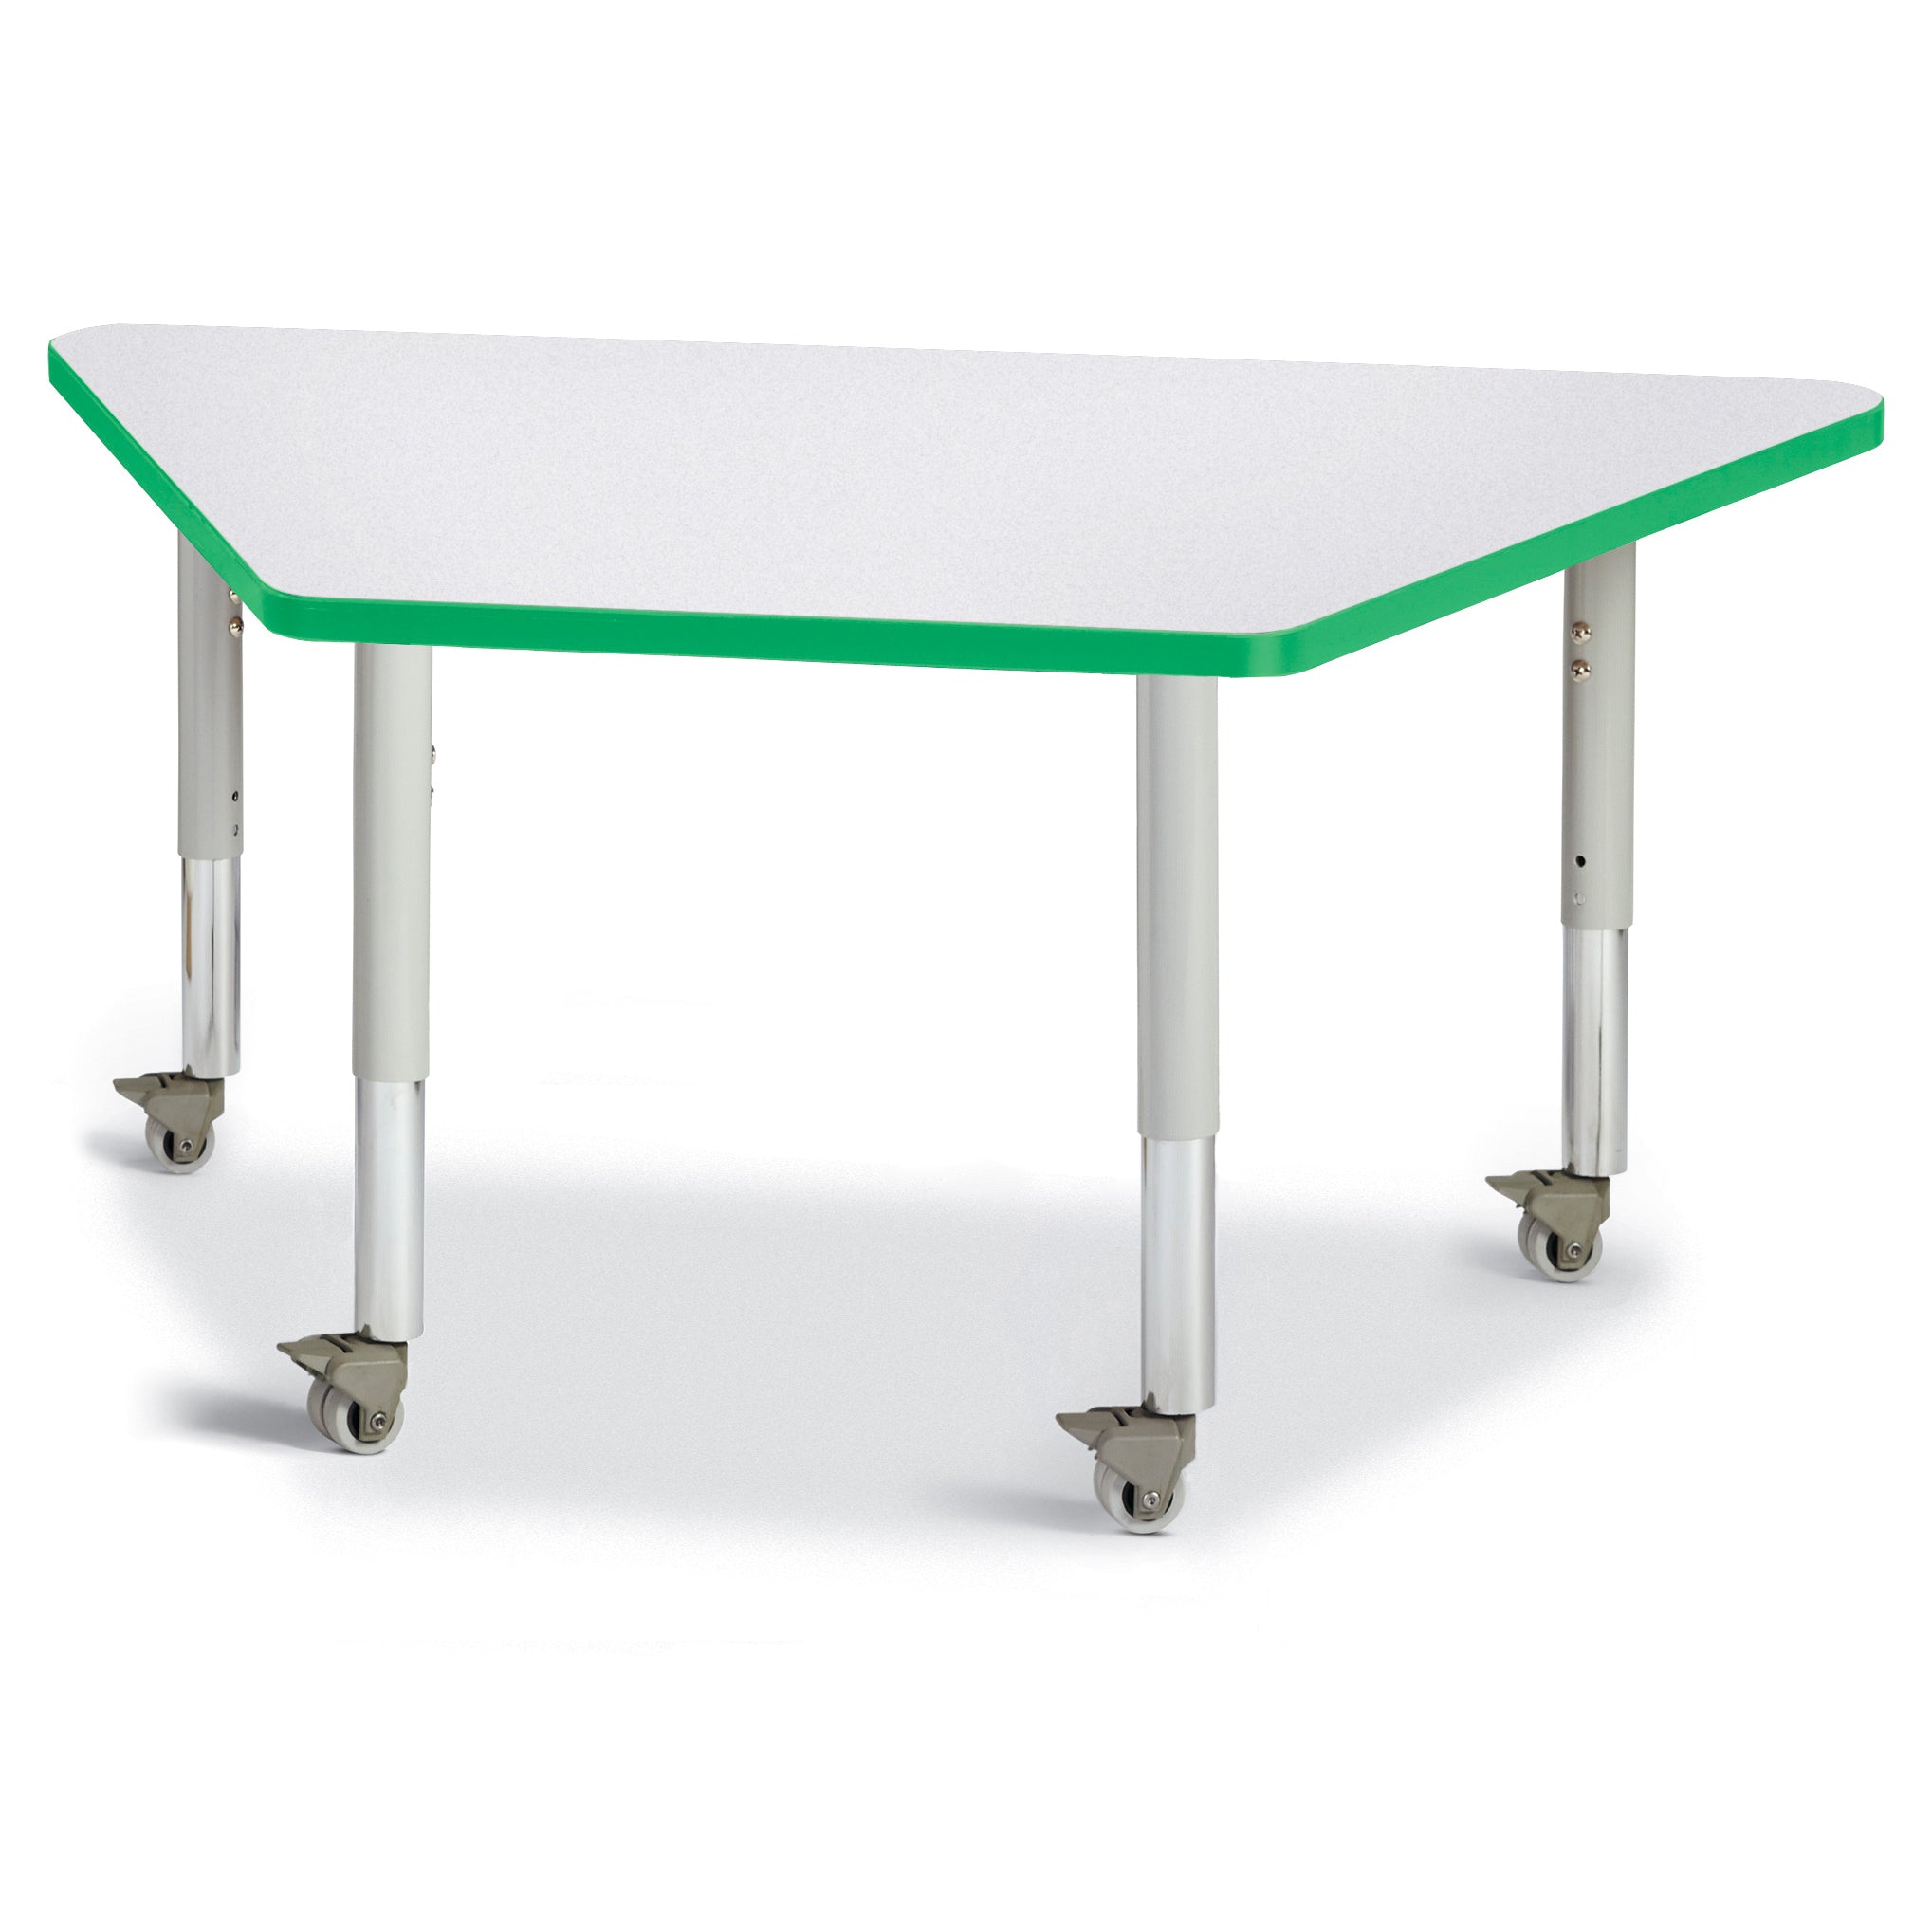 6438JCM119, Berries Trapezoid Activity Tables - 24" X 48", Mobile - Freckled Gray/Green/Gray